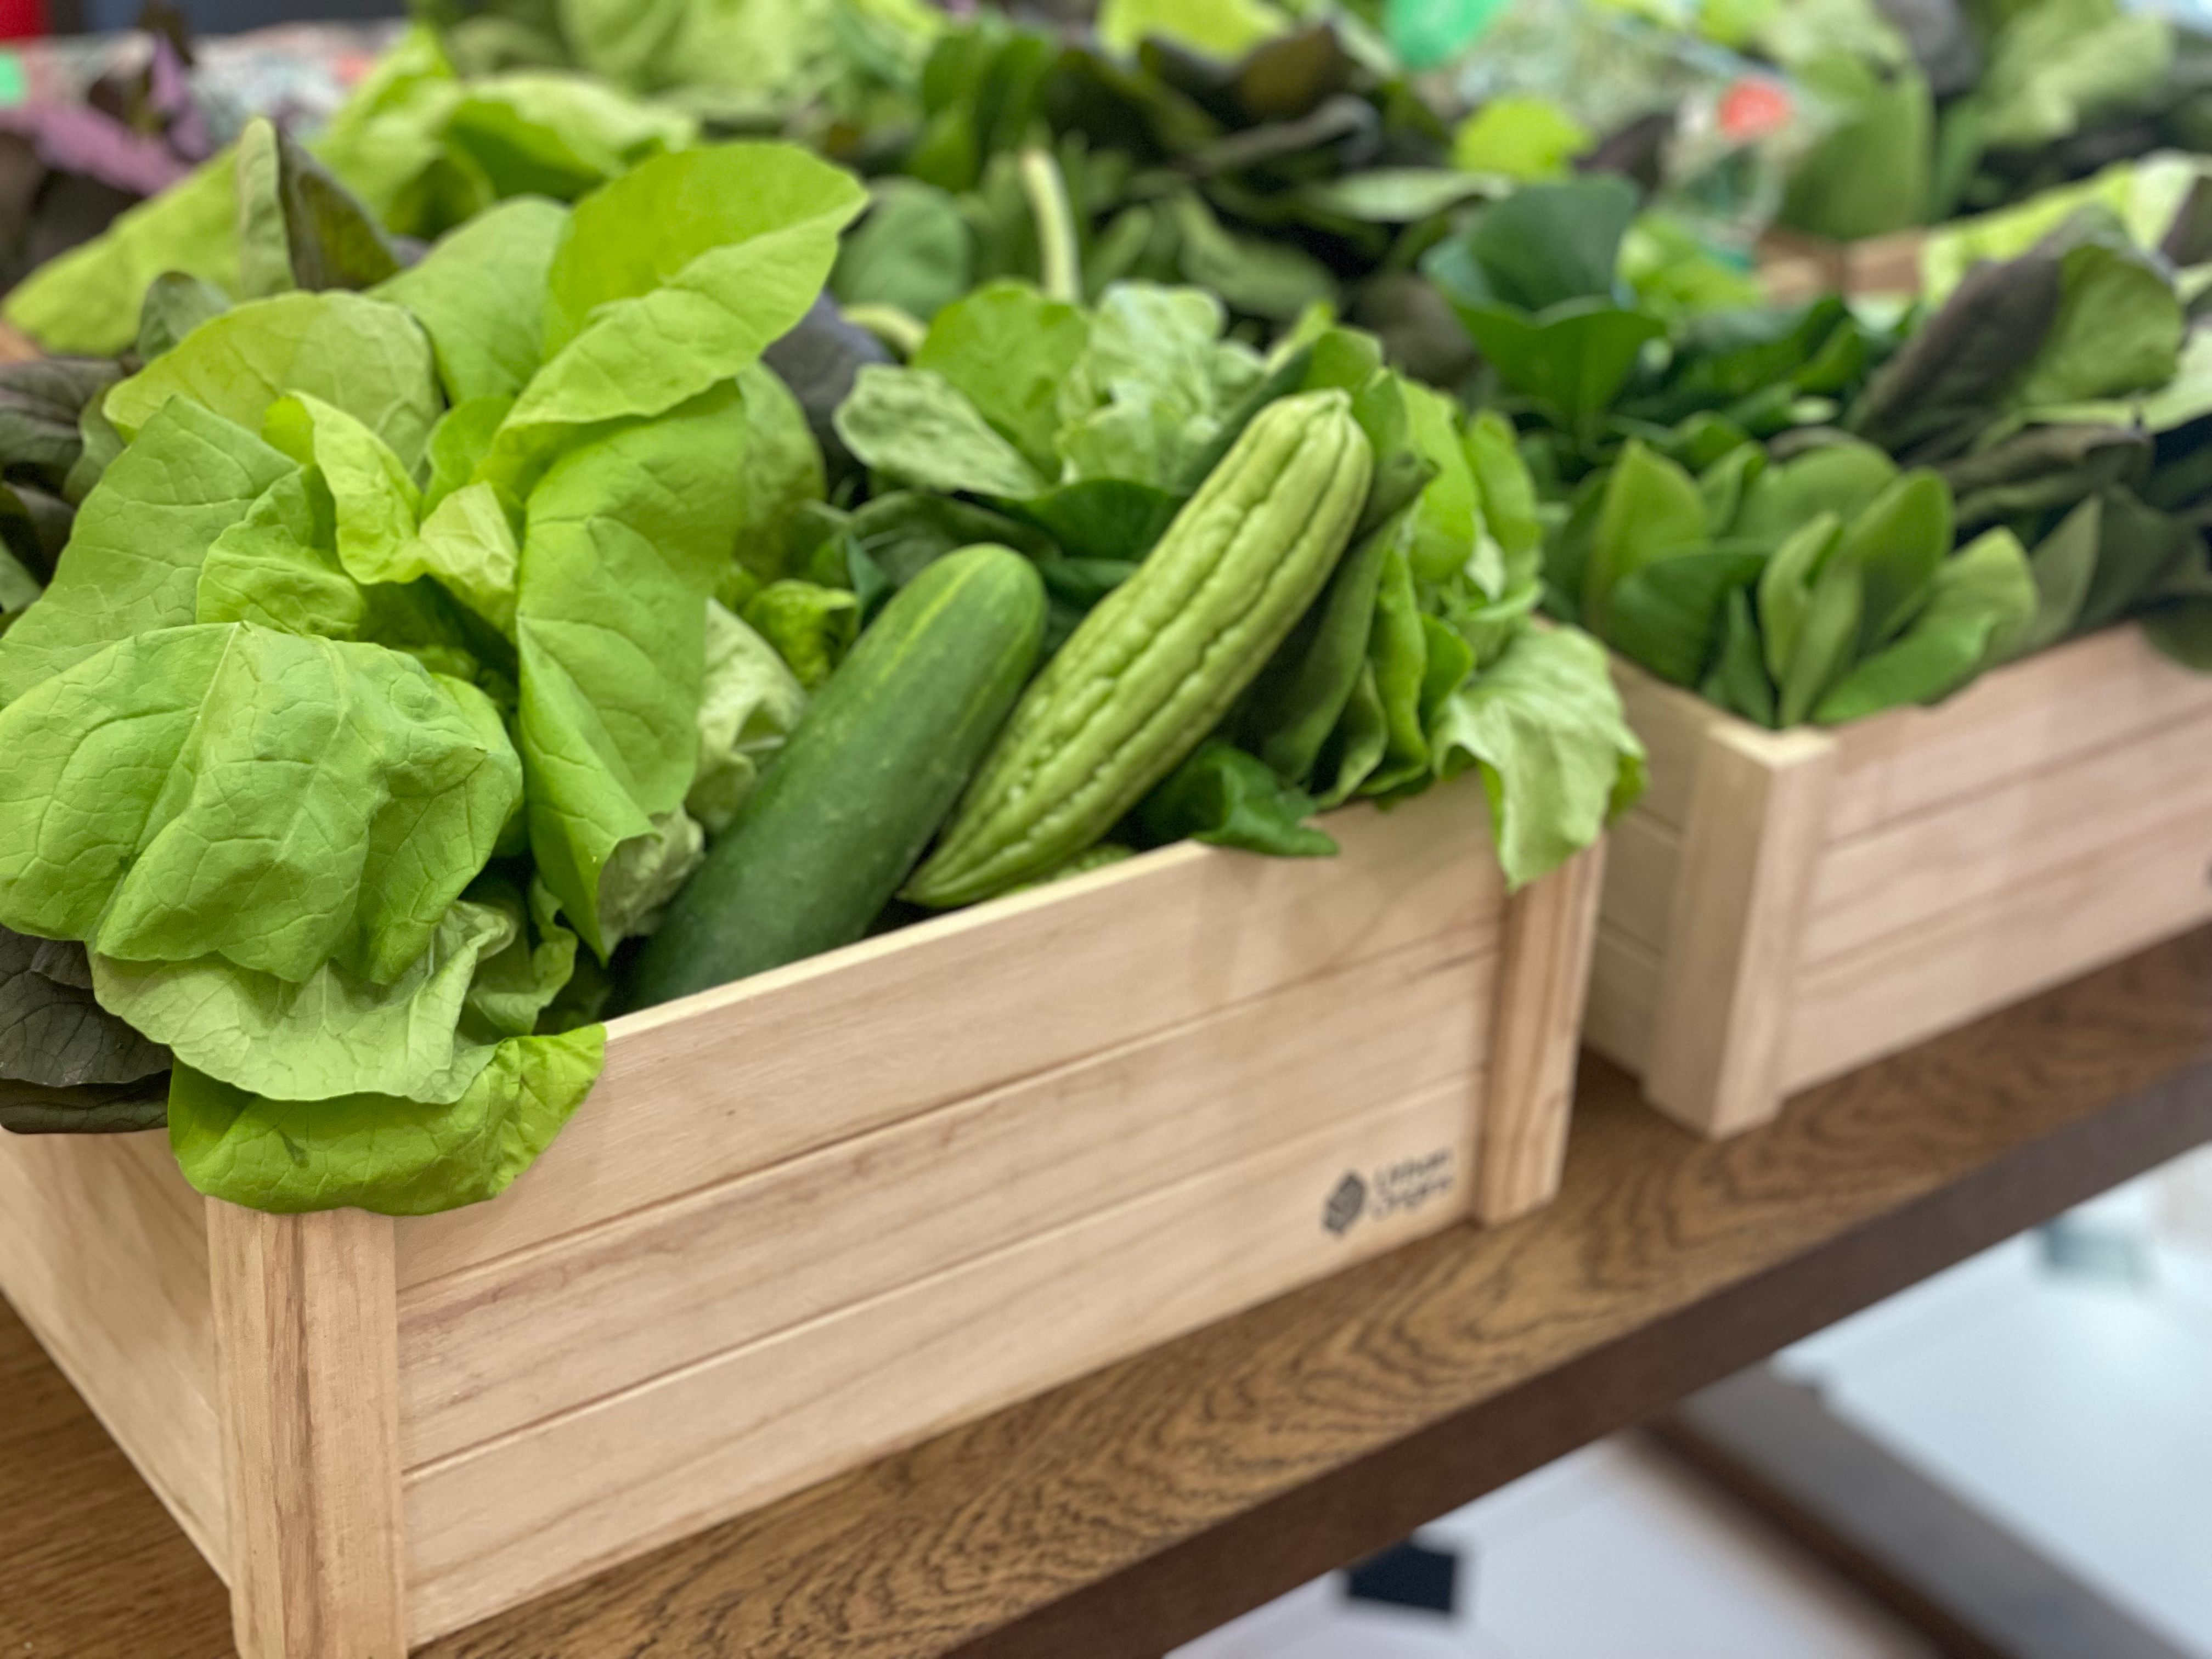 12 Reasons Why You Should Buy Local Produce in Singapore